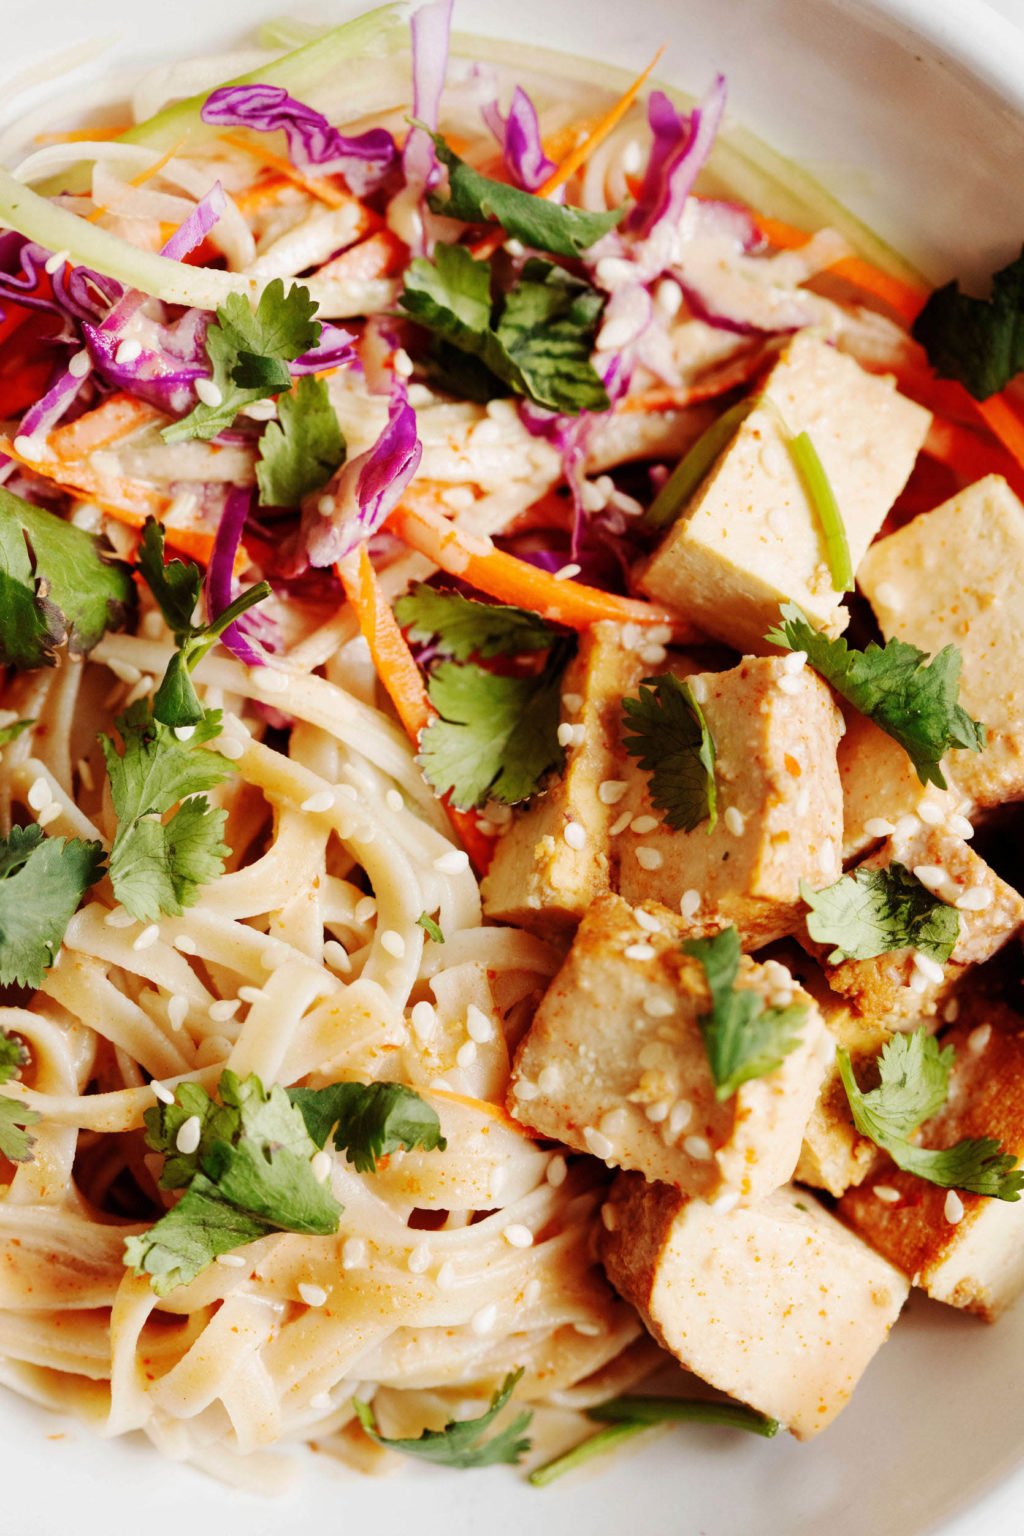 A zoomed in, overhead photograph of a tangle of pad thai noodles, tofu, vegetables, and herbs.